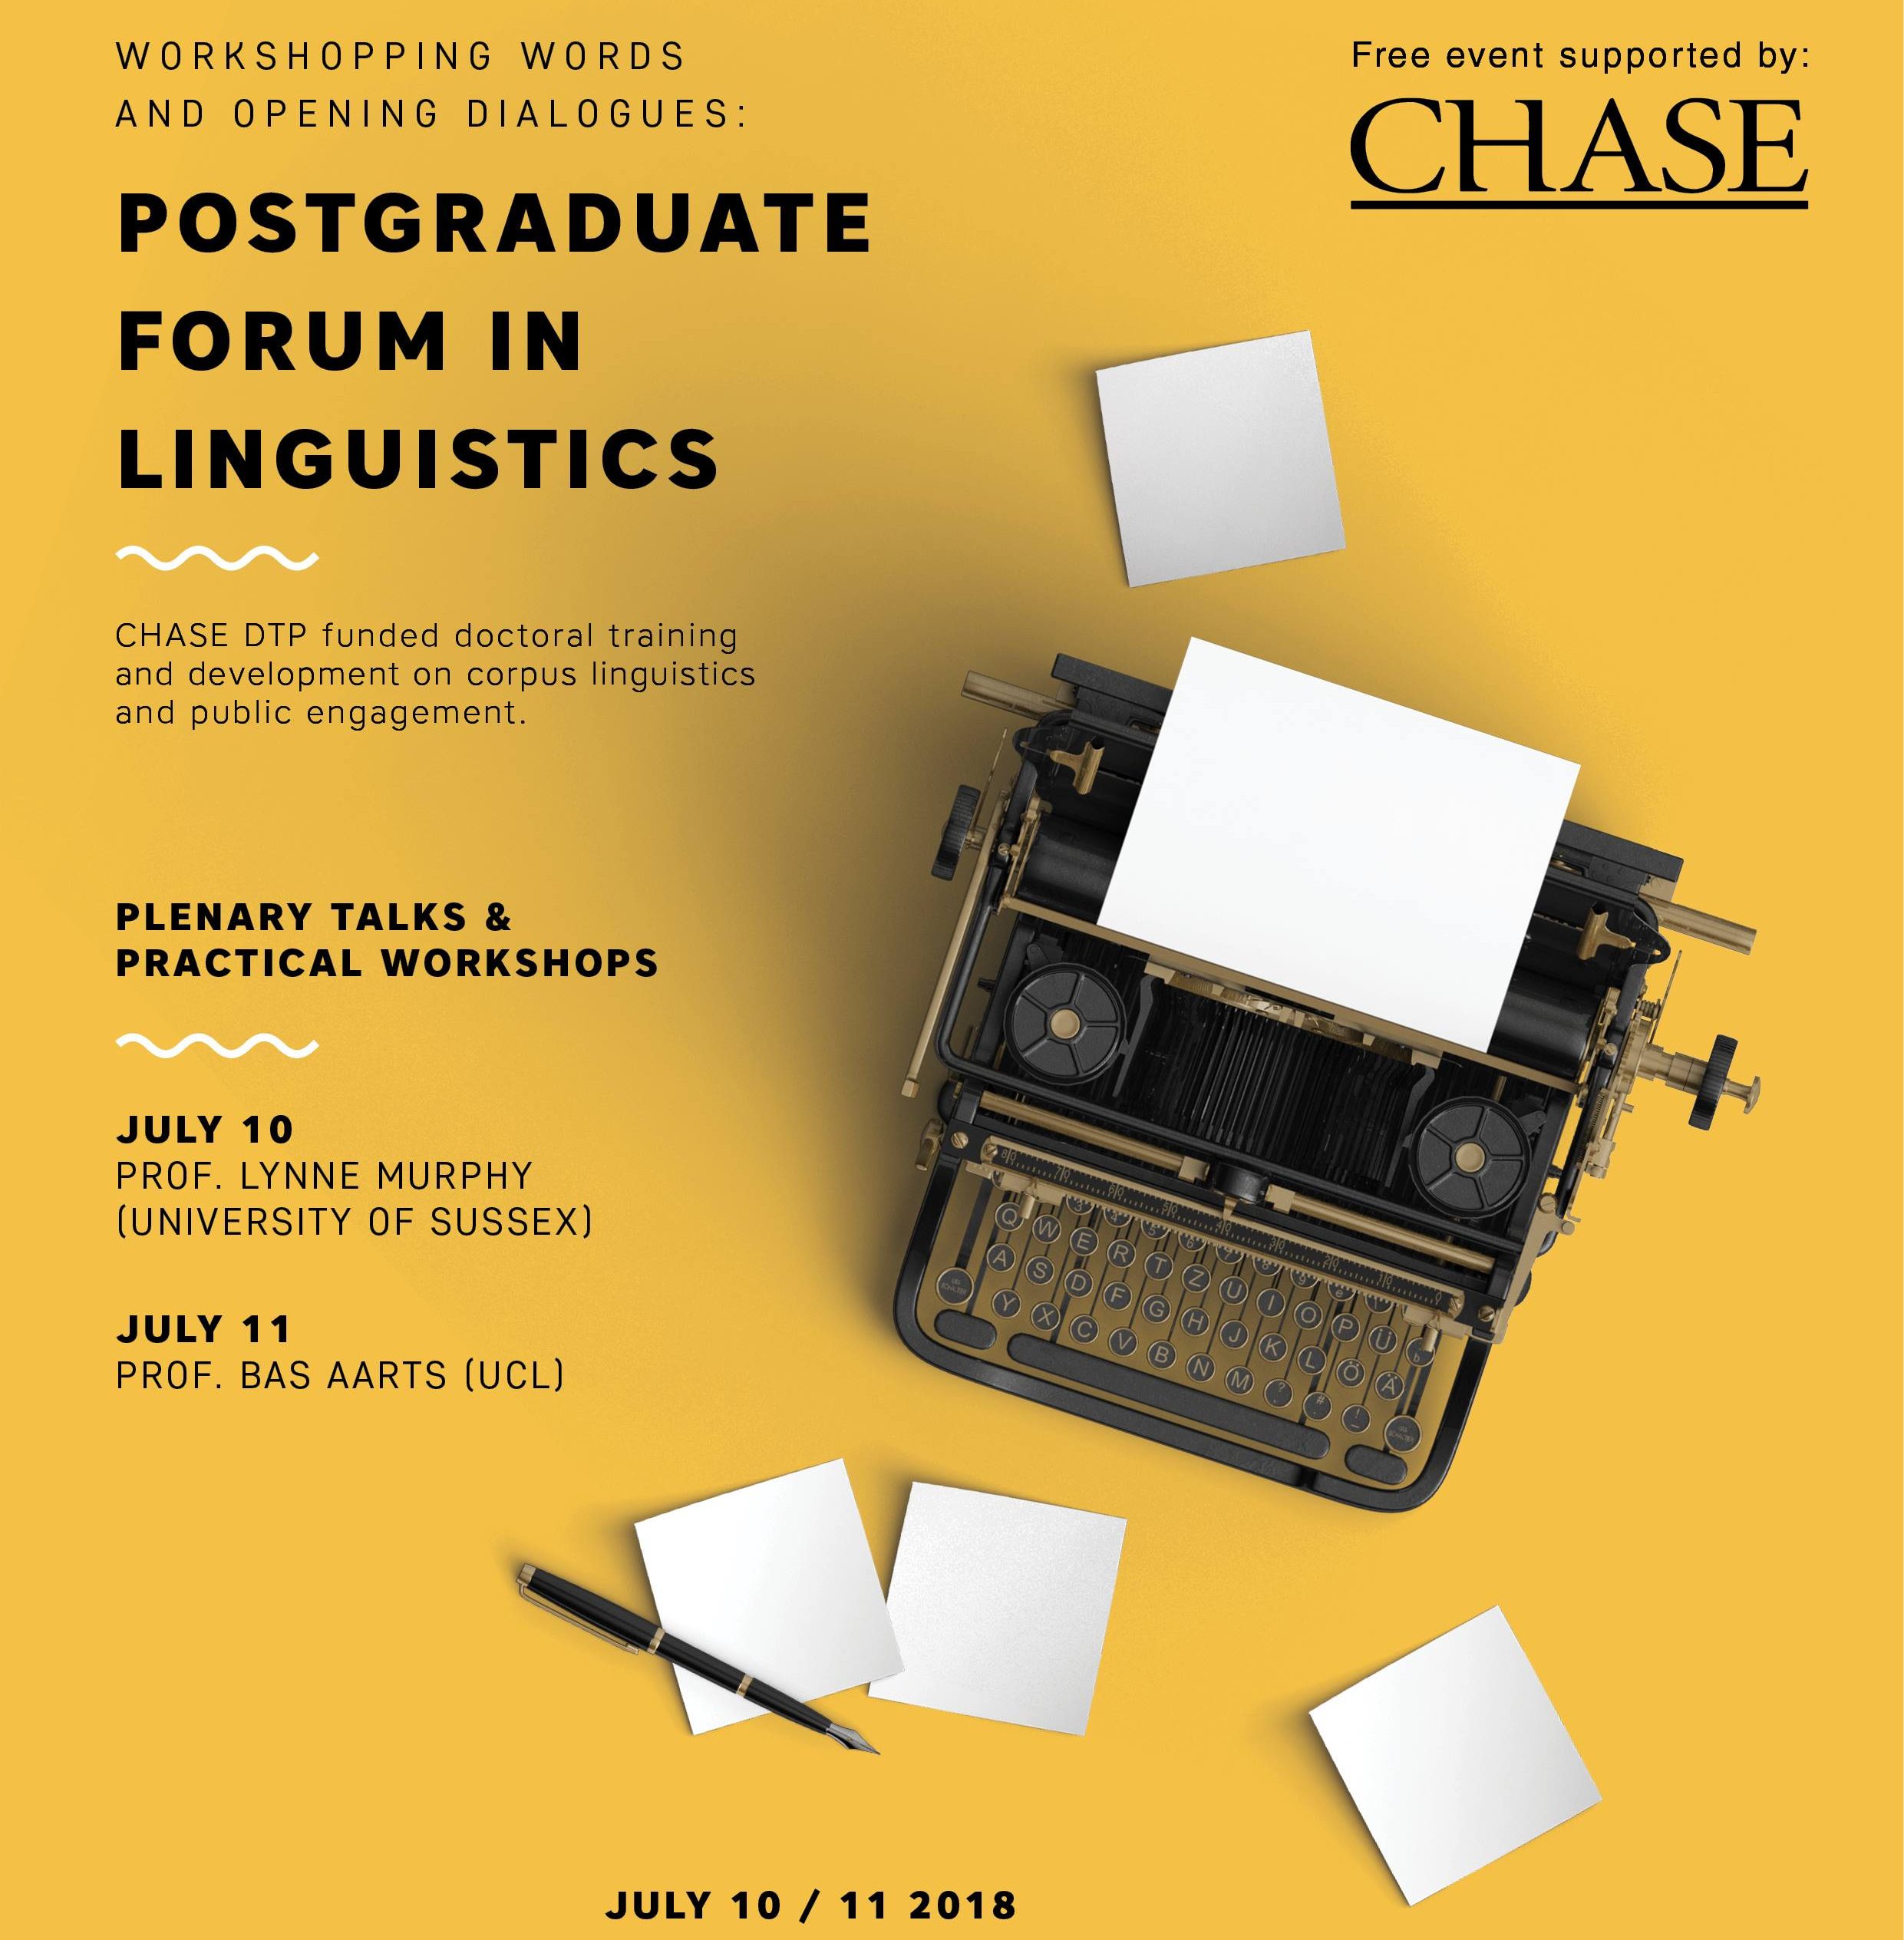 Workshopping Words and Opening Dialogues: Postgraduate Forum in Linguistics